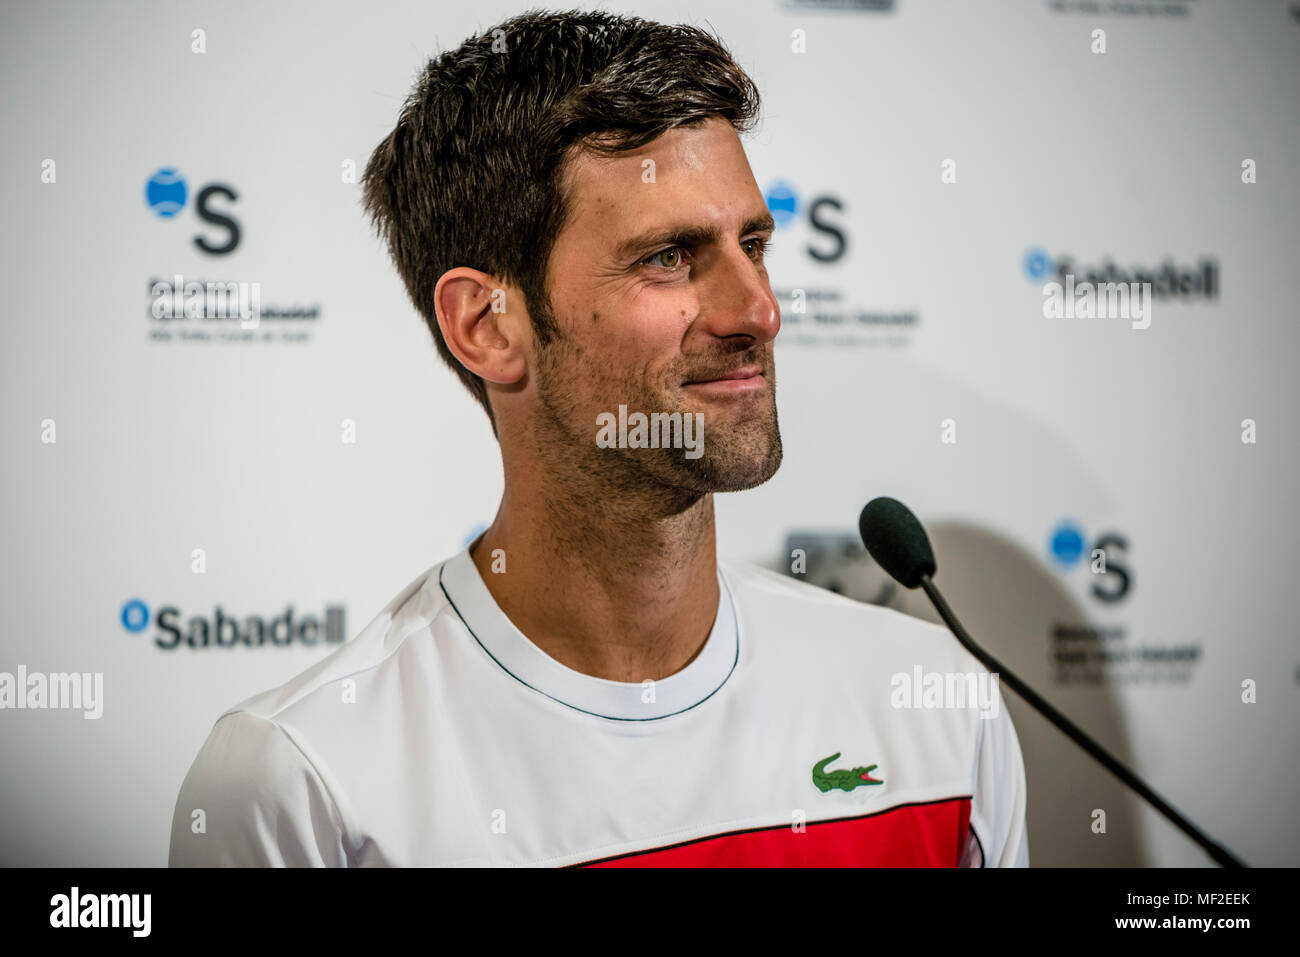 Barcelona, Spain. 24 April, 2018:  NOVAK DJOKOVIC (SRB) holds a press conference during Day 2 of the 'Barcelona Open Banc Sabadell' 2018. Credit: Matthias Oesterle/Alamy Live News Stock Photo